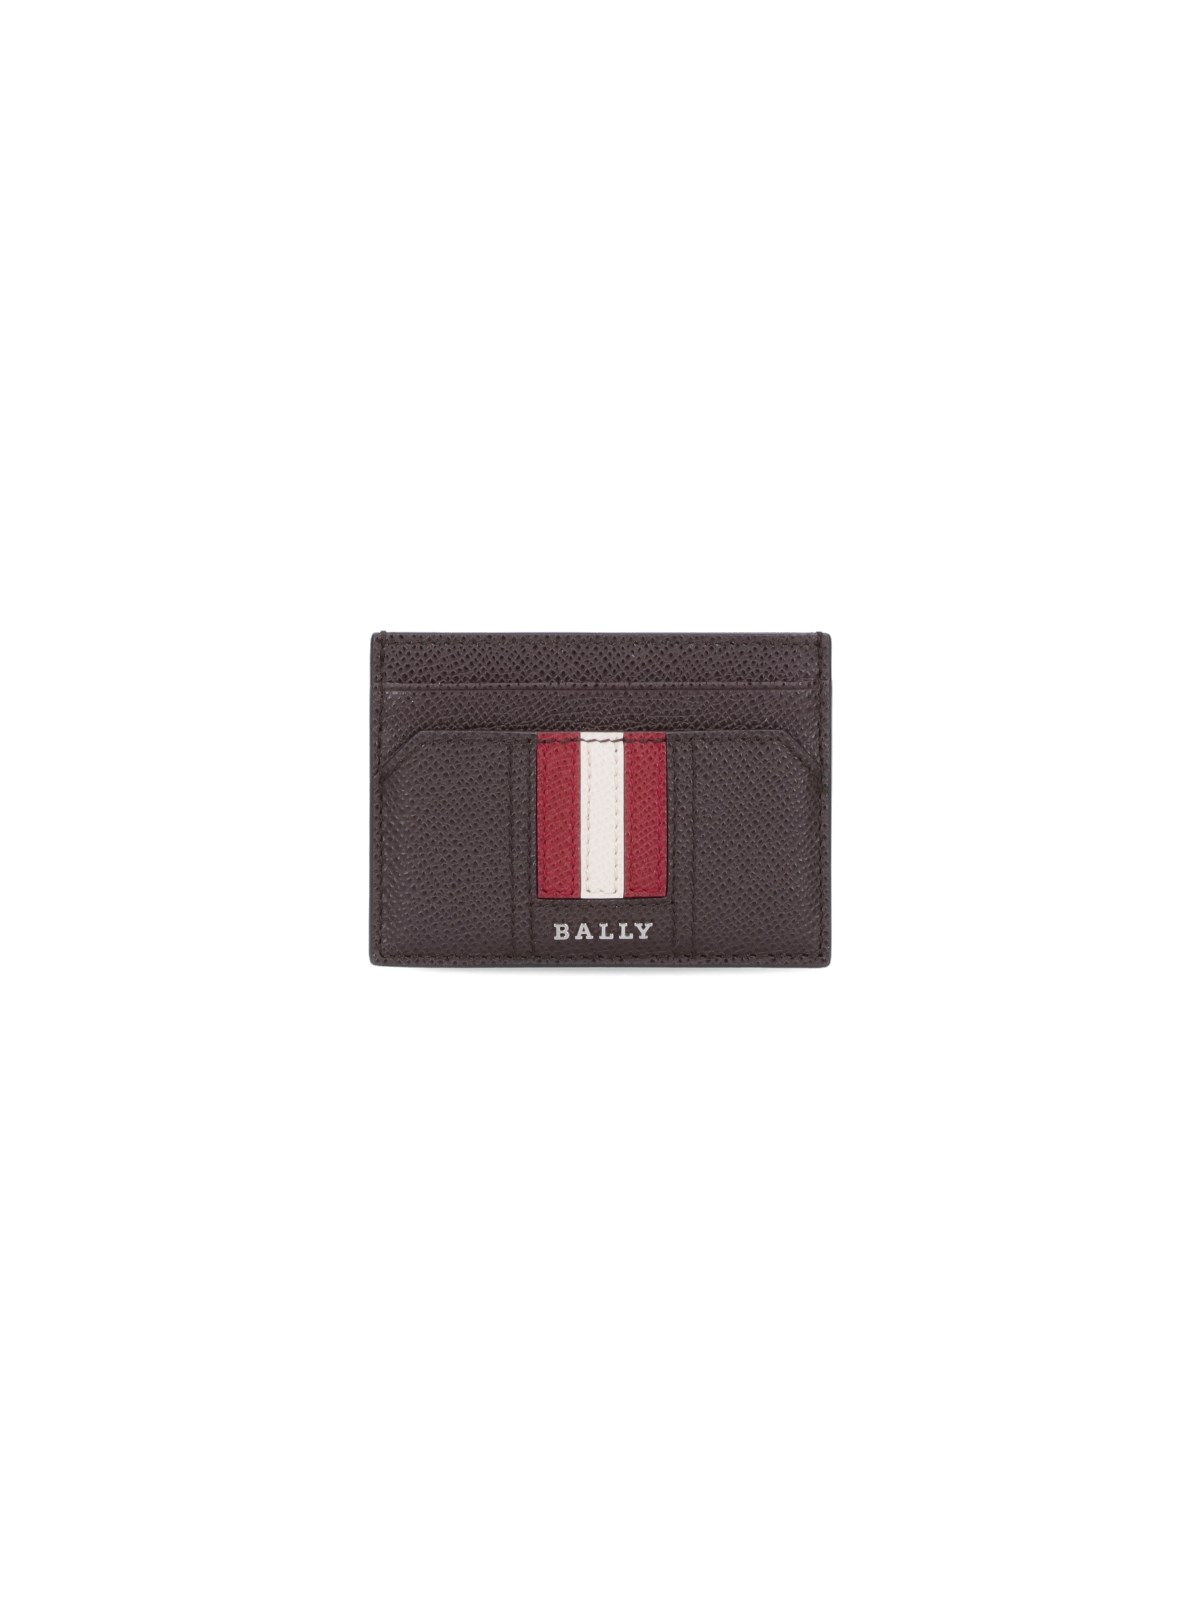 Bally Thar Stripe Leather Card Holder In Brown